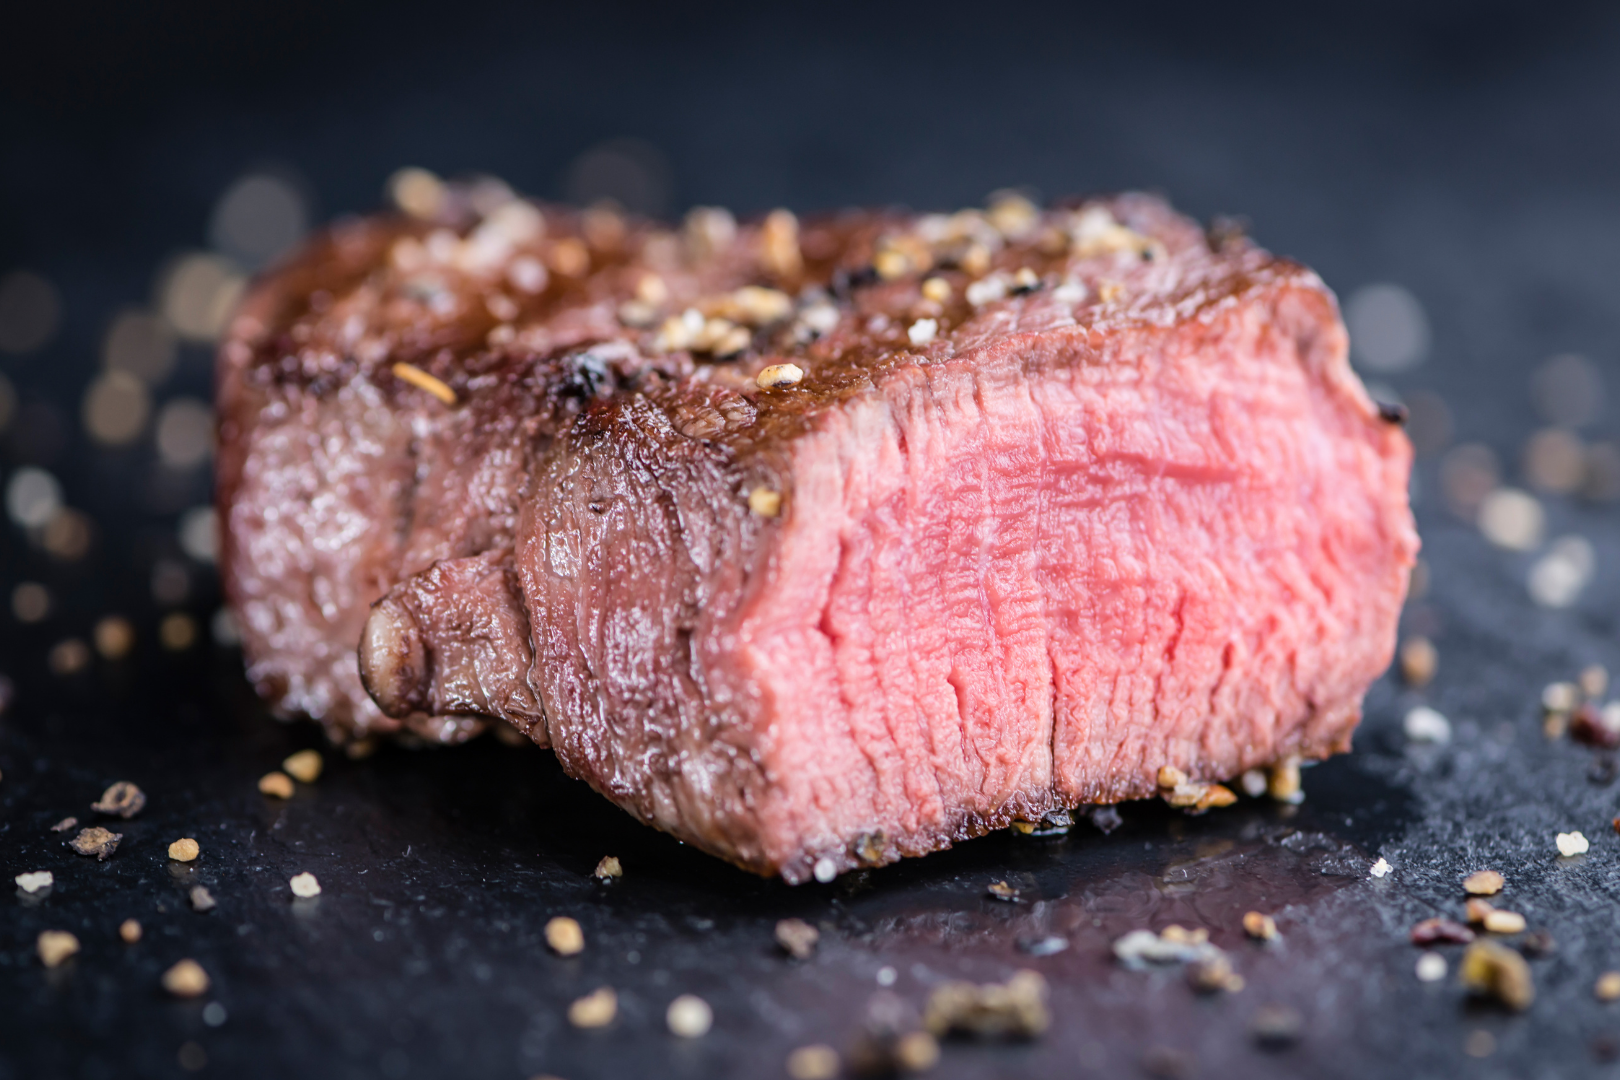 Cast Iron or Grill? Best Cooking Methods for Steak